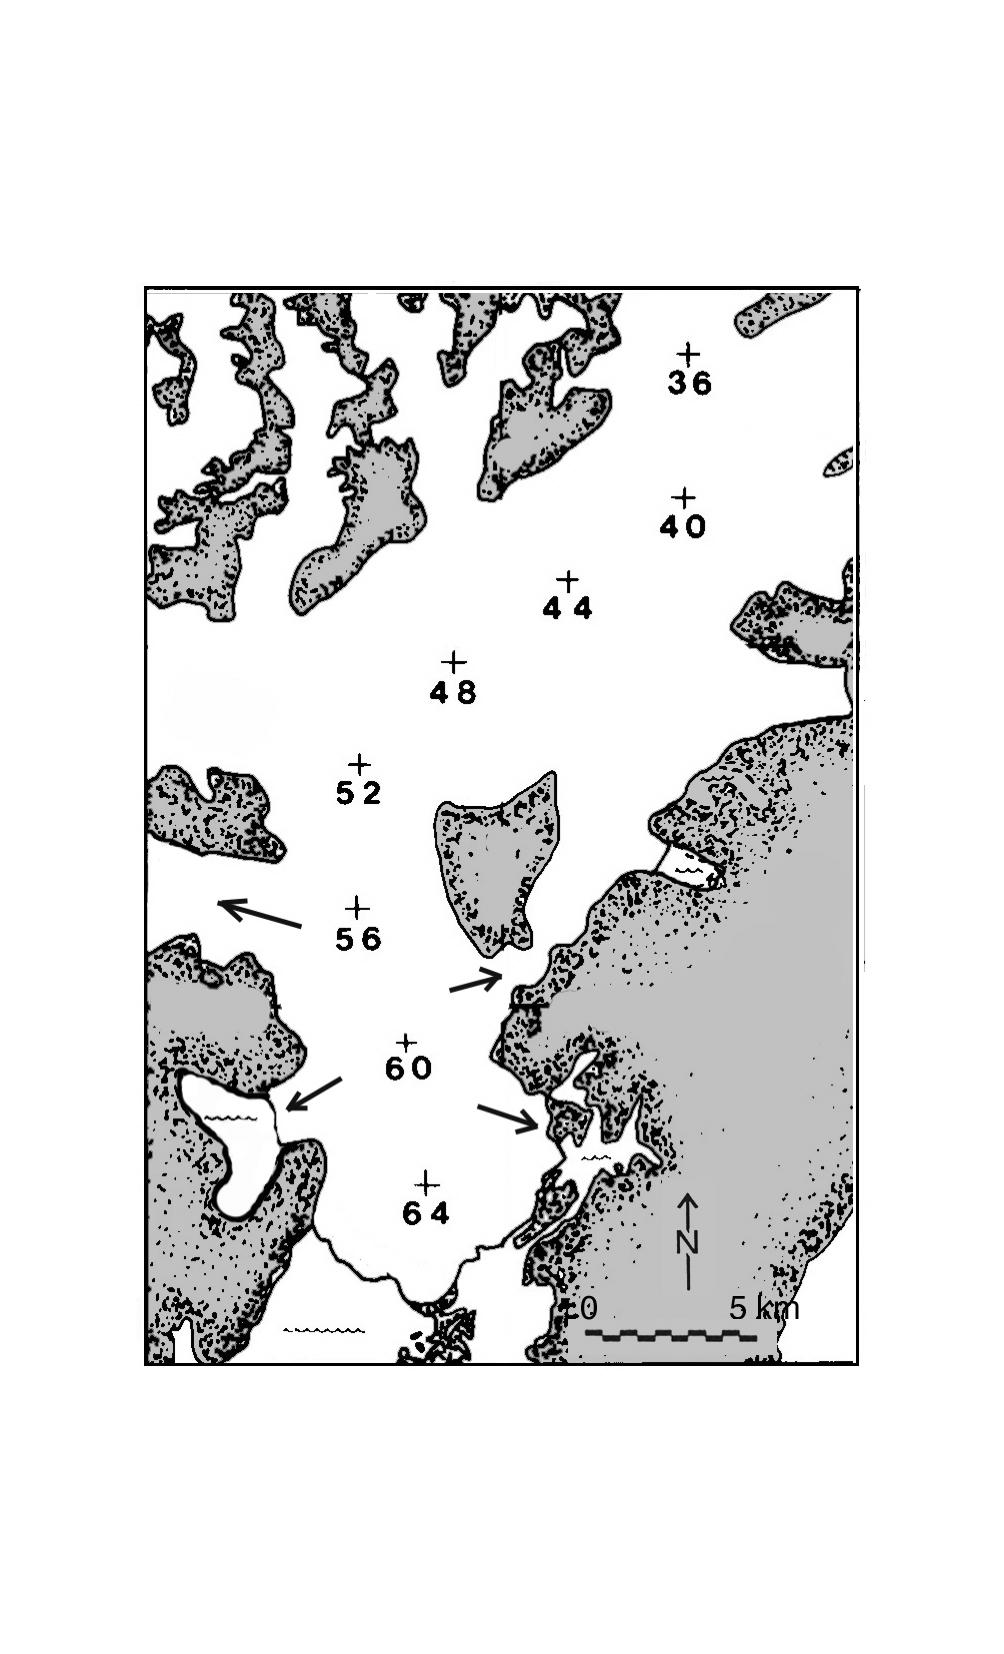 98 Controls on advance of tidewater glaciers Figure 5.14: Map of Columbia Fjord. Numbers indicate the distance from the head of the glacier along the central flow line.